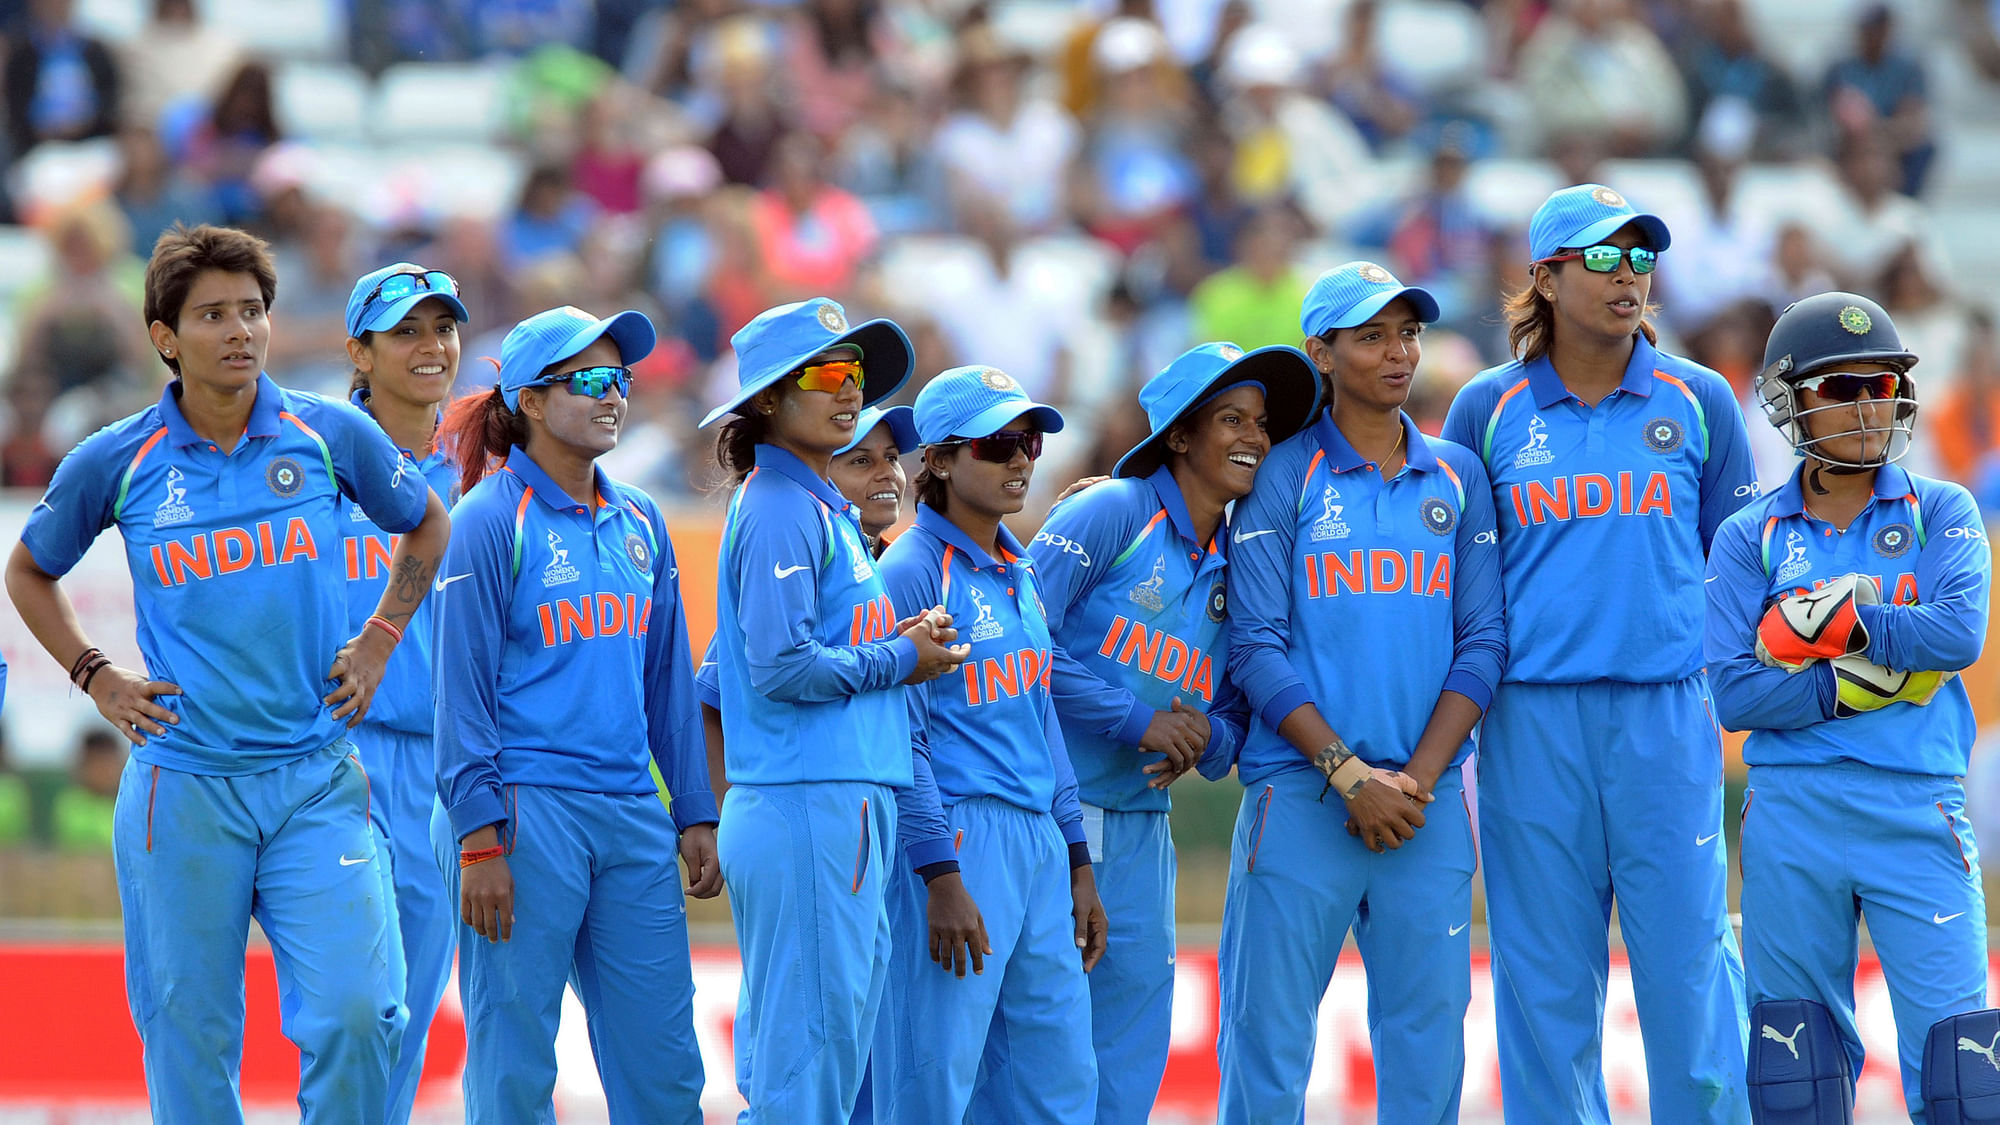 BCCI on Saturday announced a cash prize of Rs 50 lakh for each member of the Indian women’s cricket team.